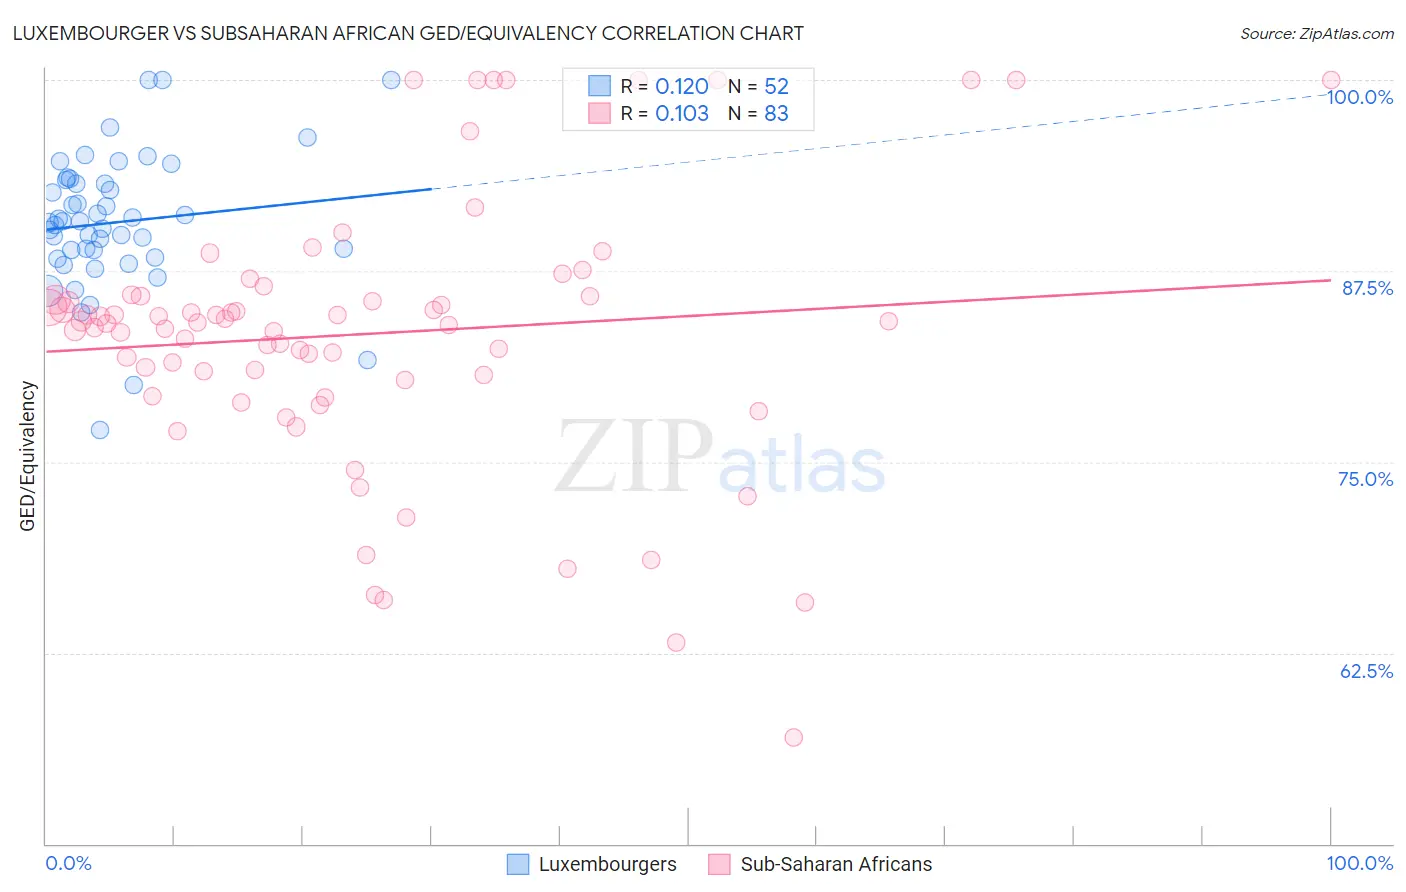 Luxembourger vs Subsaharan African GED/Equivalency